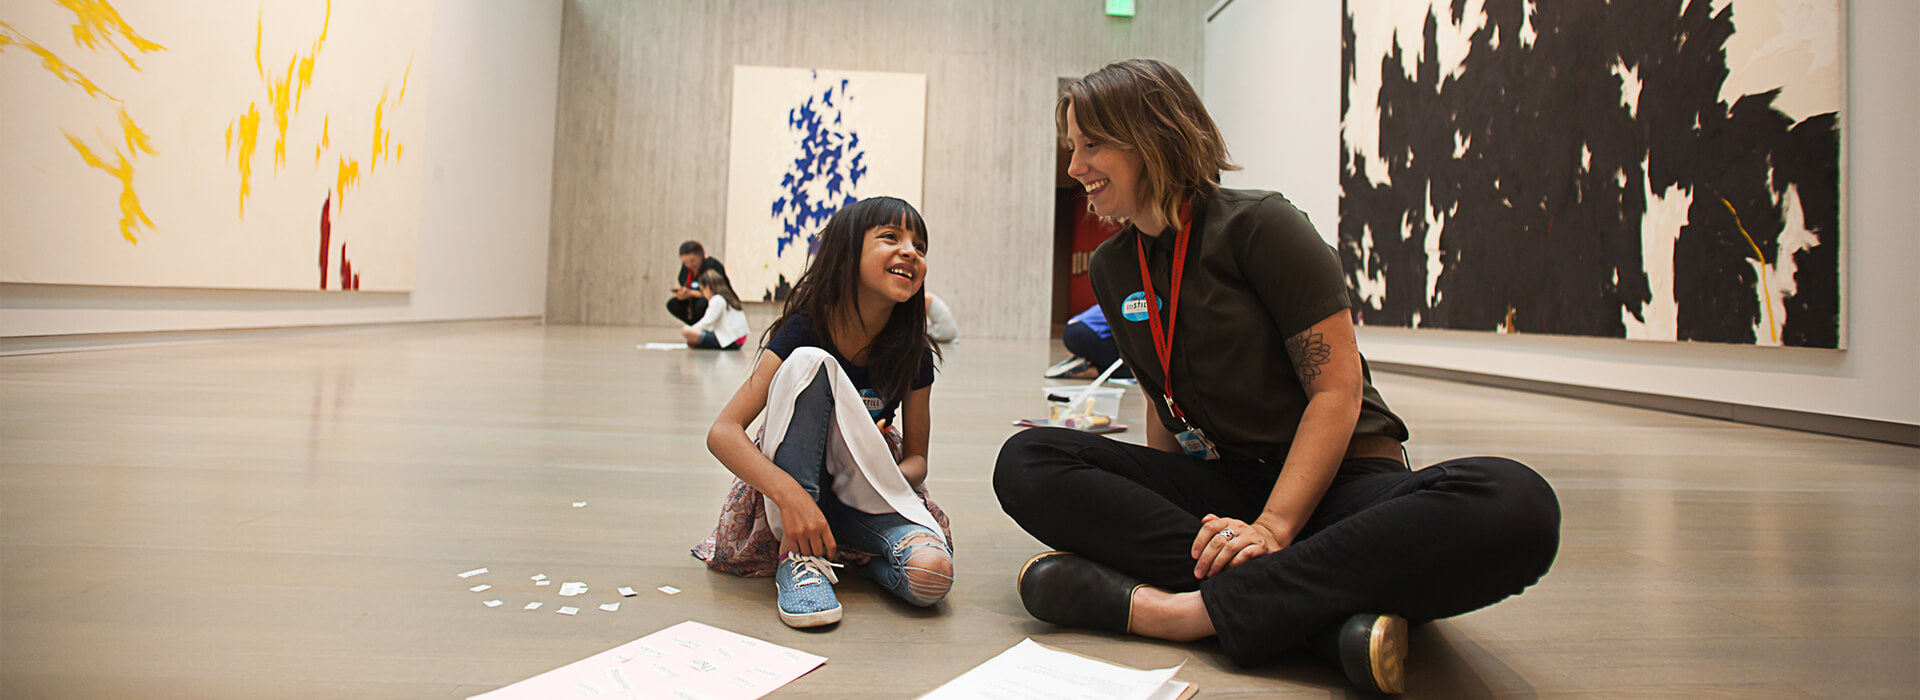 A young student sits on the floor of a museum gallery and smiles up at a teacher, also seated on the floor